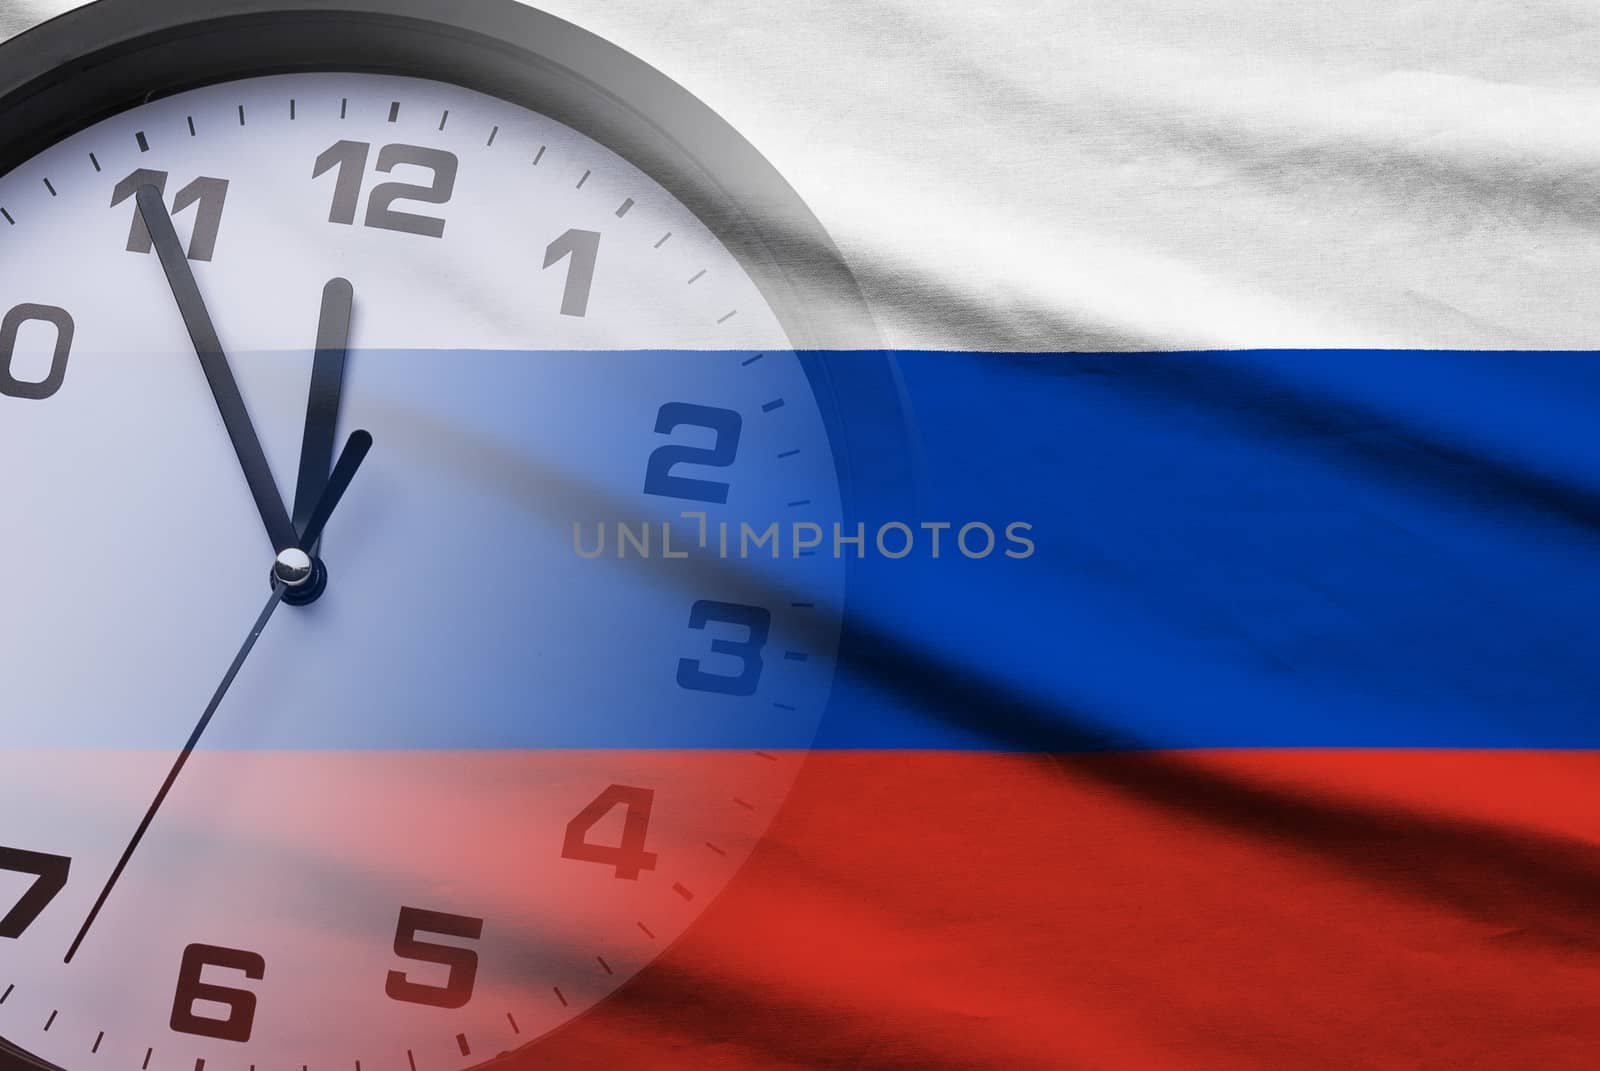 Composite of the Russian flag and clock face by sergii_gnatiuk